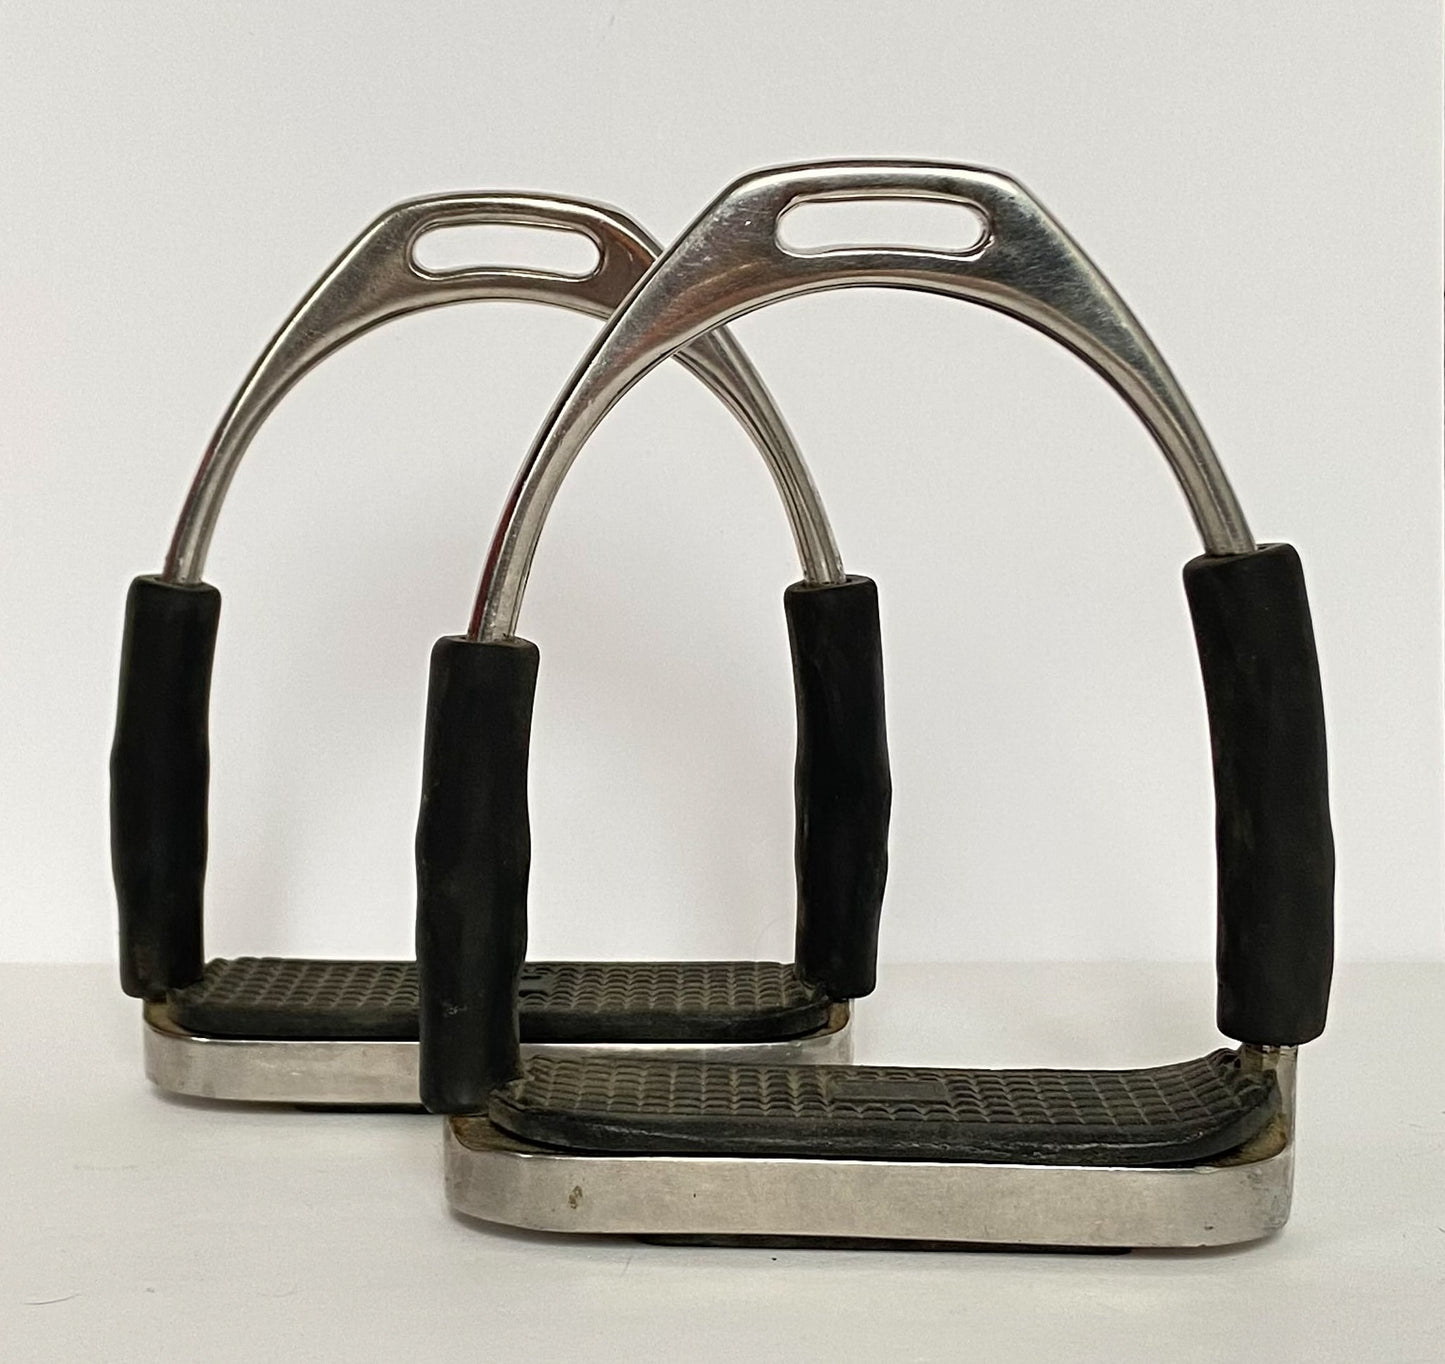 Stainless Steel Articulated Stirrups - Silver - 4.5"